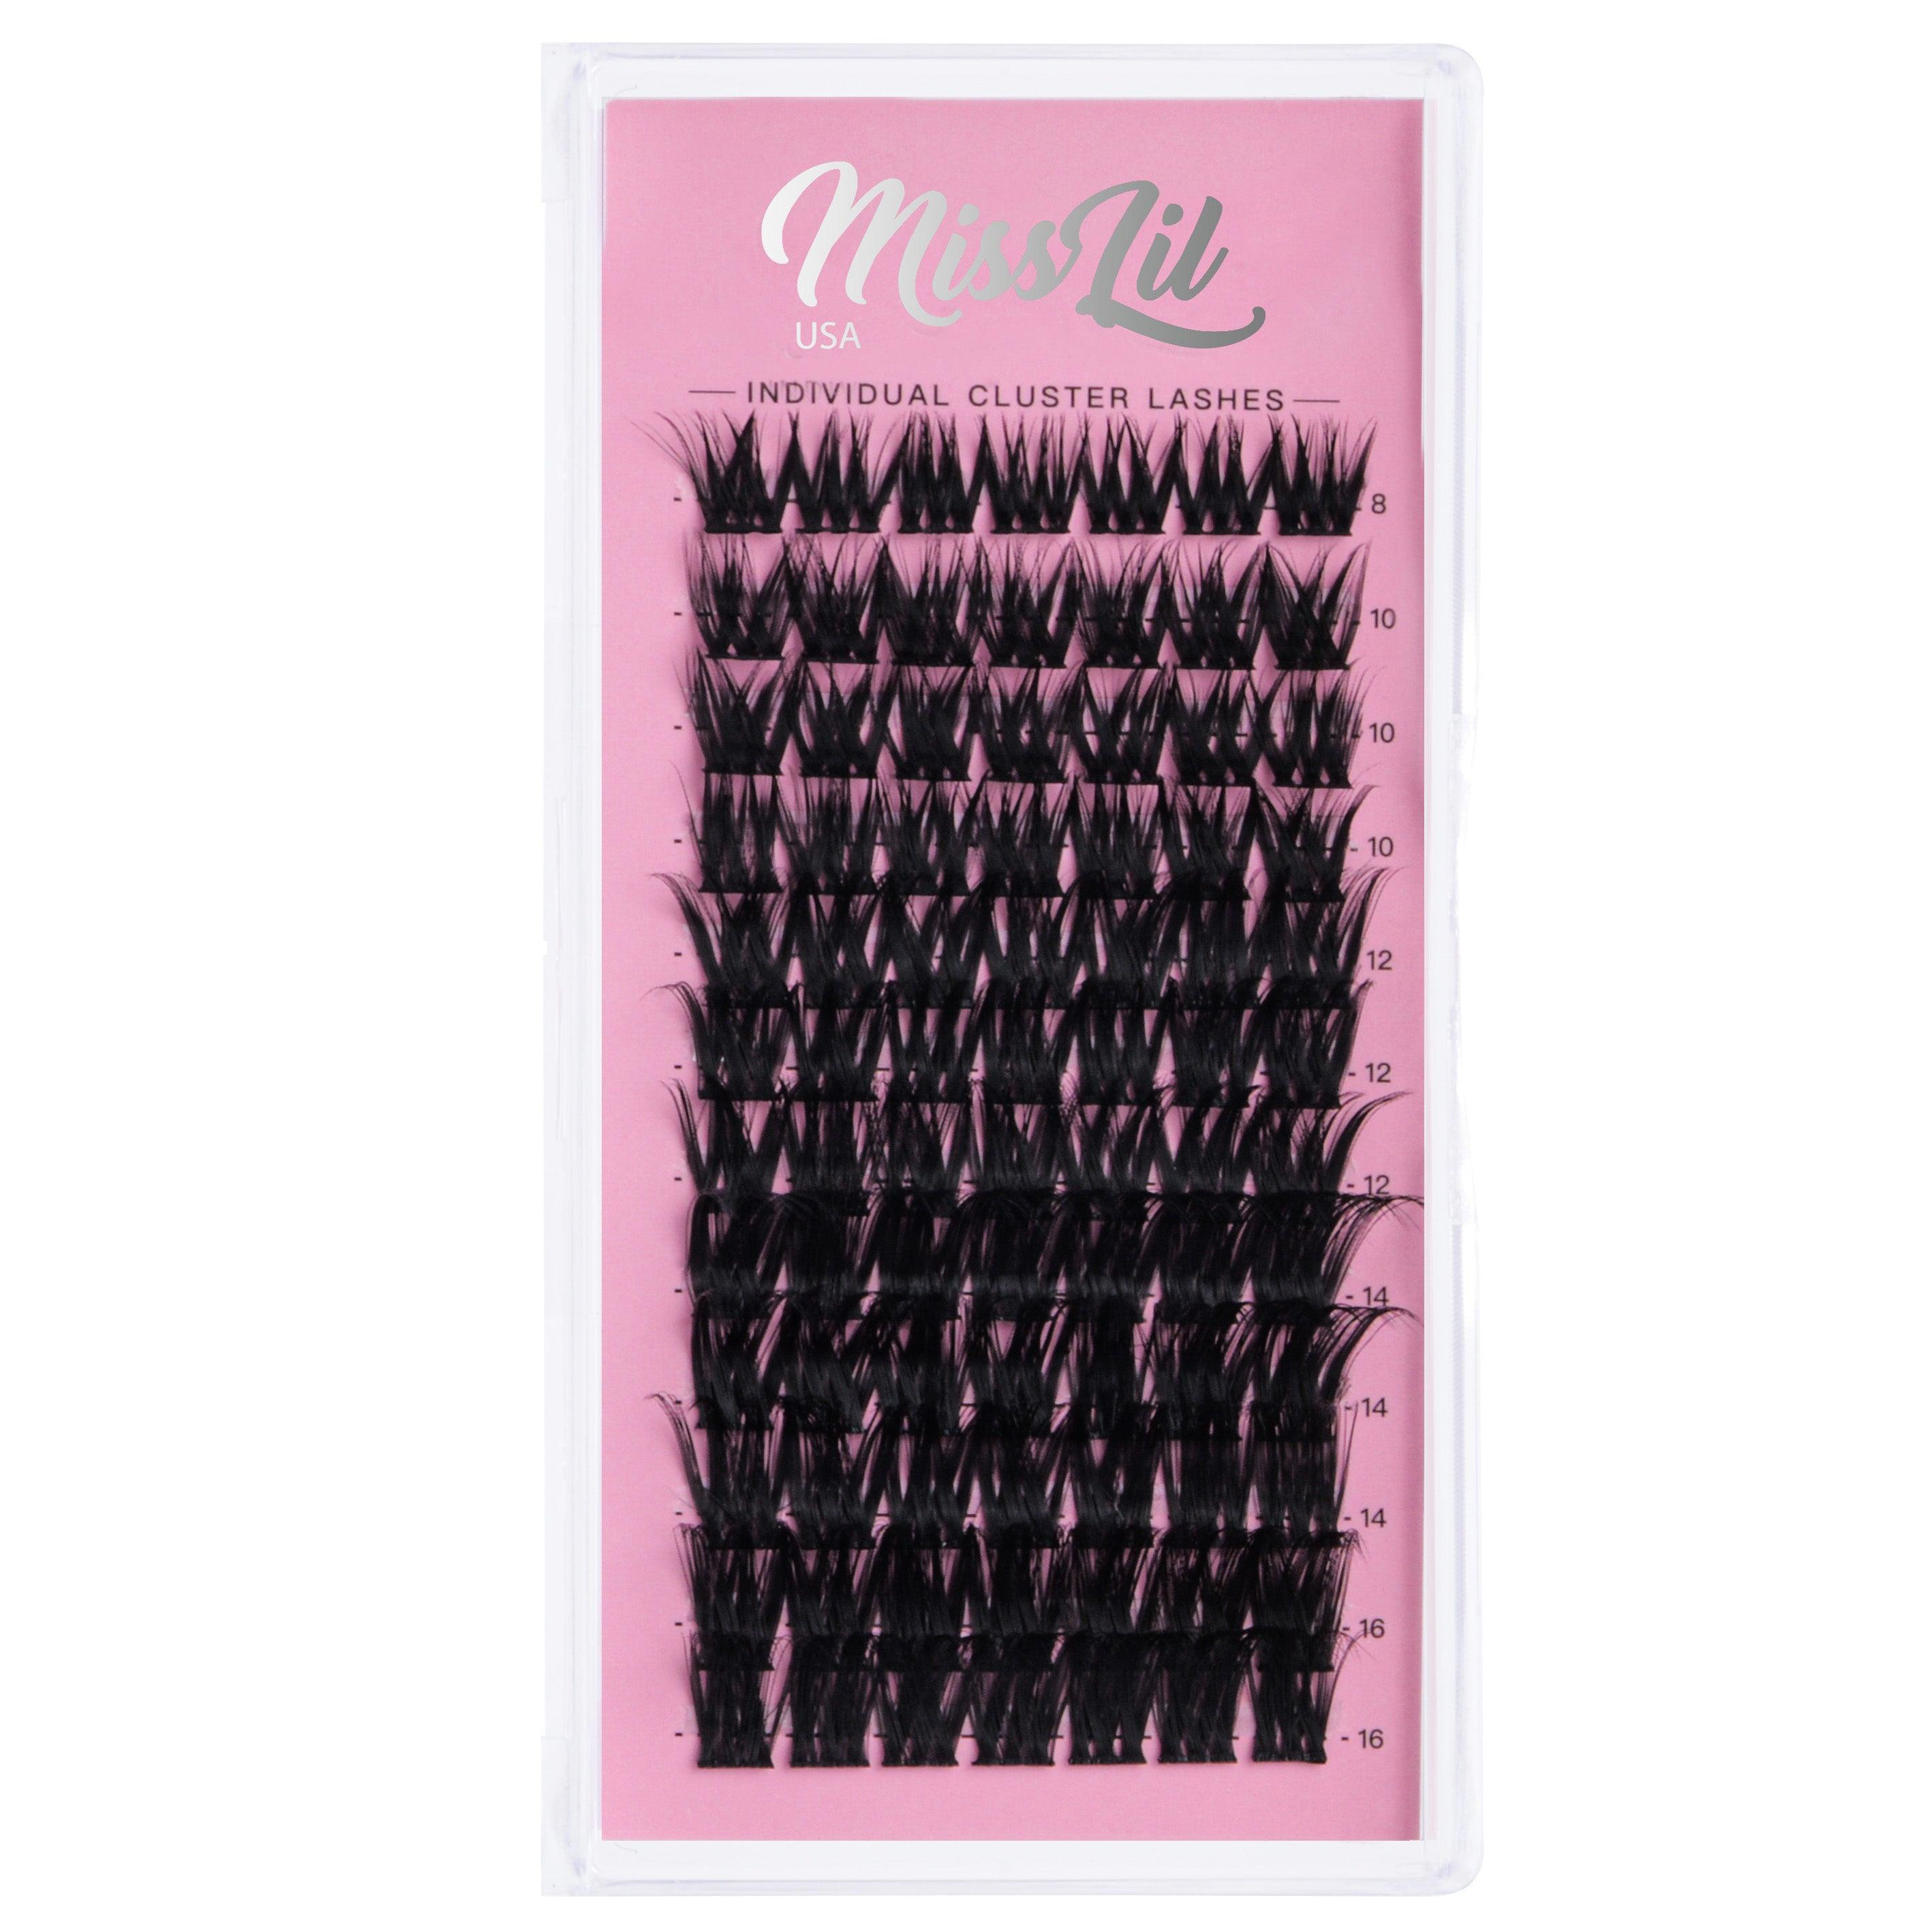 Individual Cluster Lashes AD-09 (Small Mixed Tray) - Miss Lil USA Wholesale